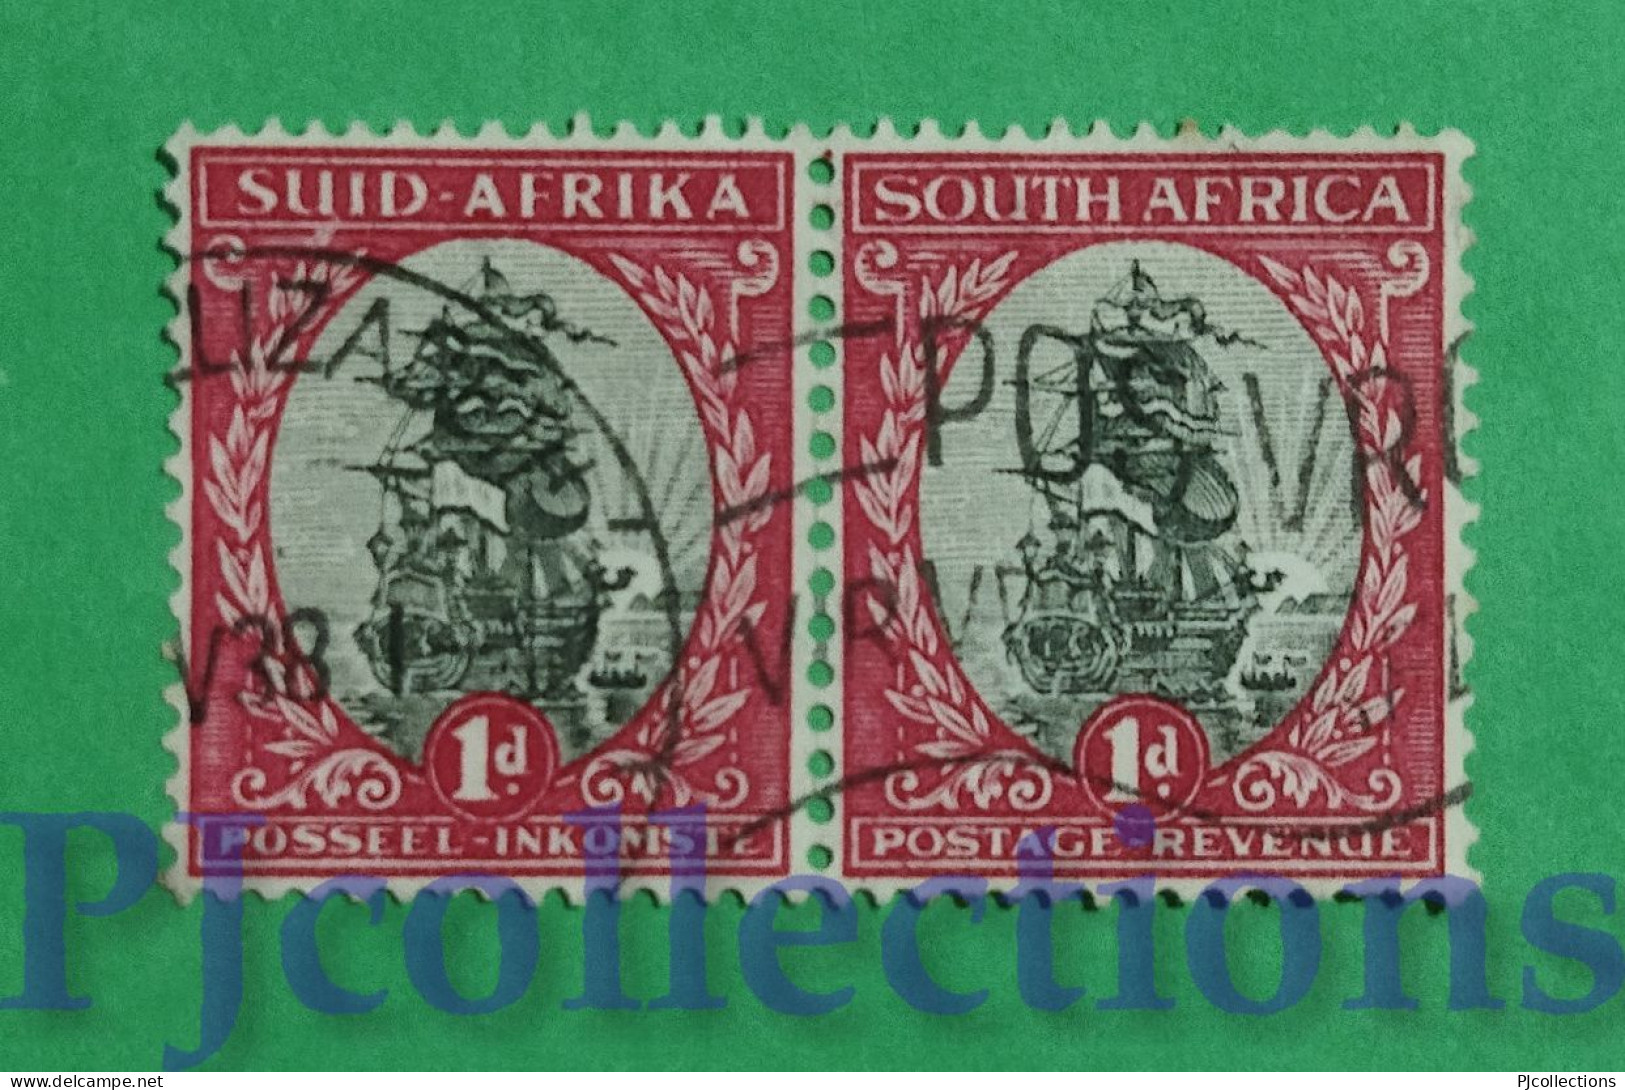 S398- SUD AFRICA - SOUTH AFRICA 1926 JAN VAN RIEBEEK'S SHIP 1d COPPIA - COUPLE USATO - USED - Used Stamps